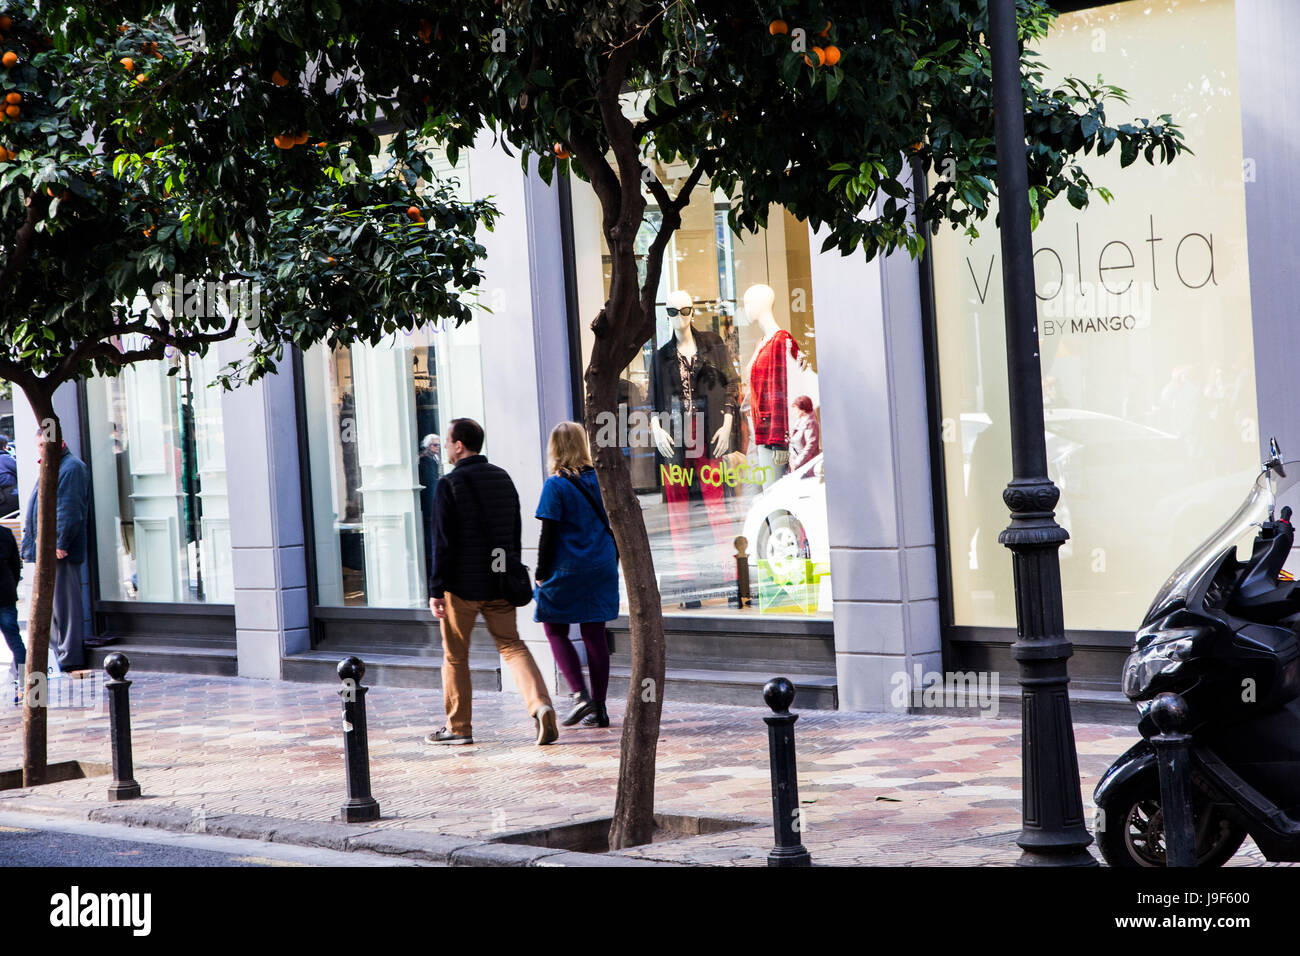 Barcas is a popular shopping street in Valencia, Spain. Stock Photo